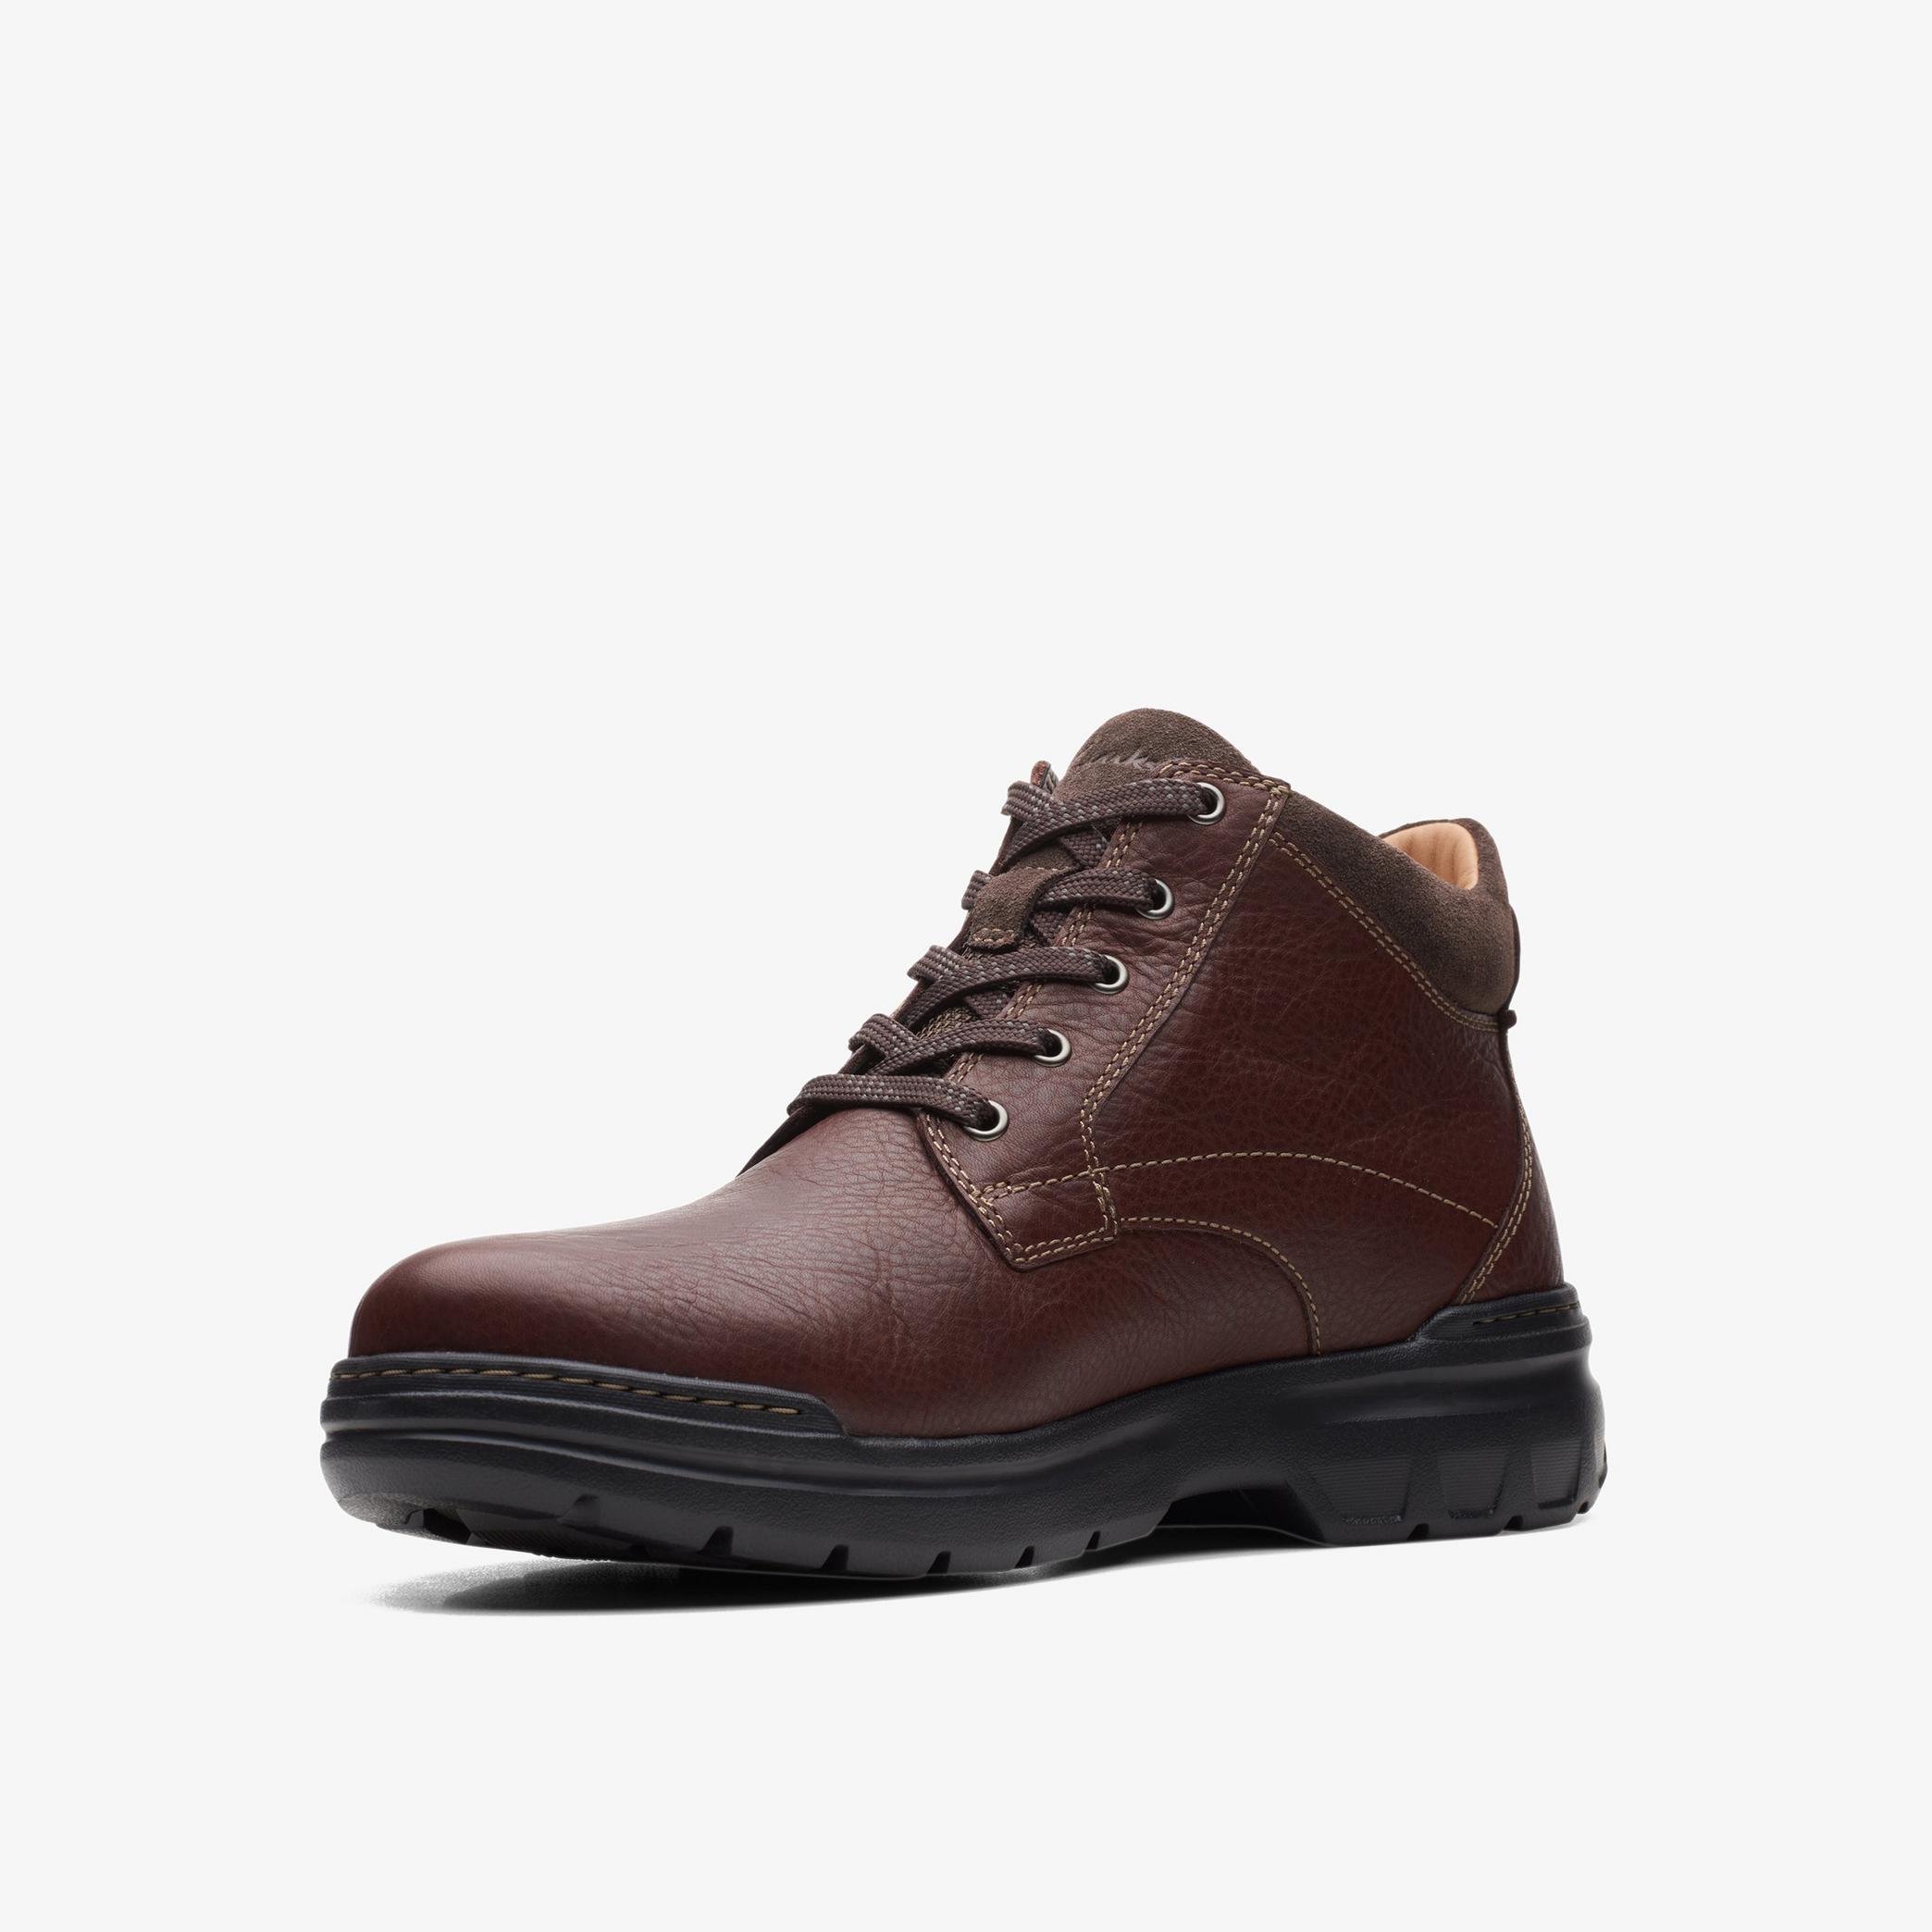 MENS Rockie2 Up GORE-TEX Mahogany Leather Ankle Boots | Clarks Outlet